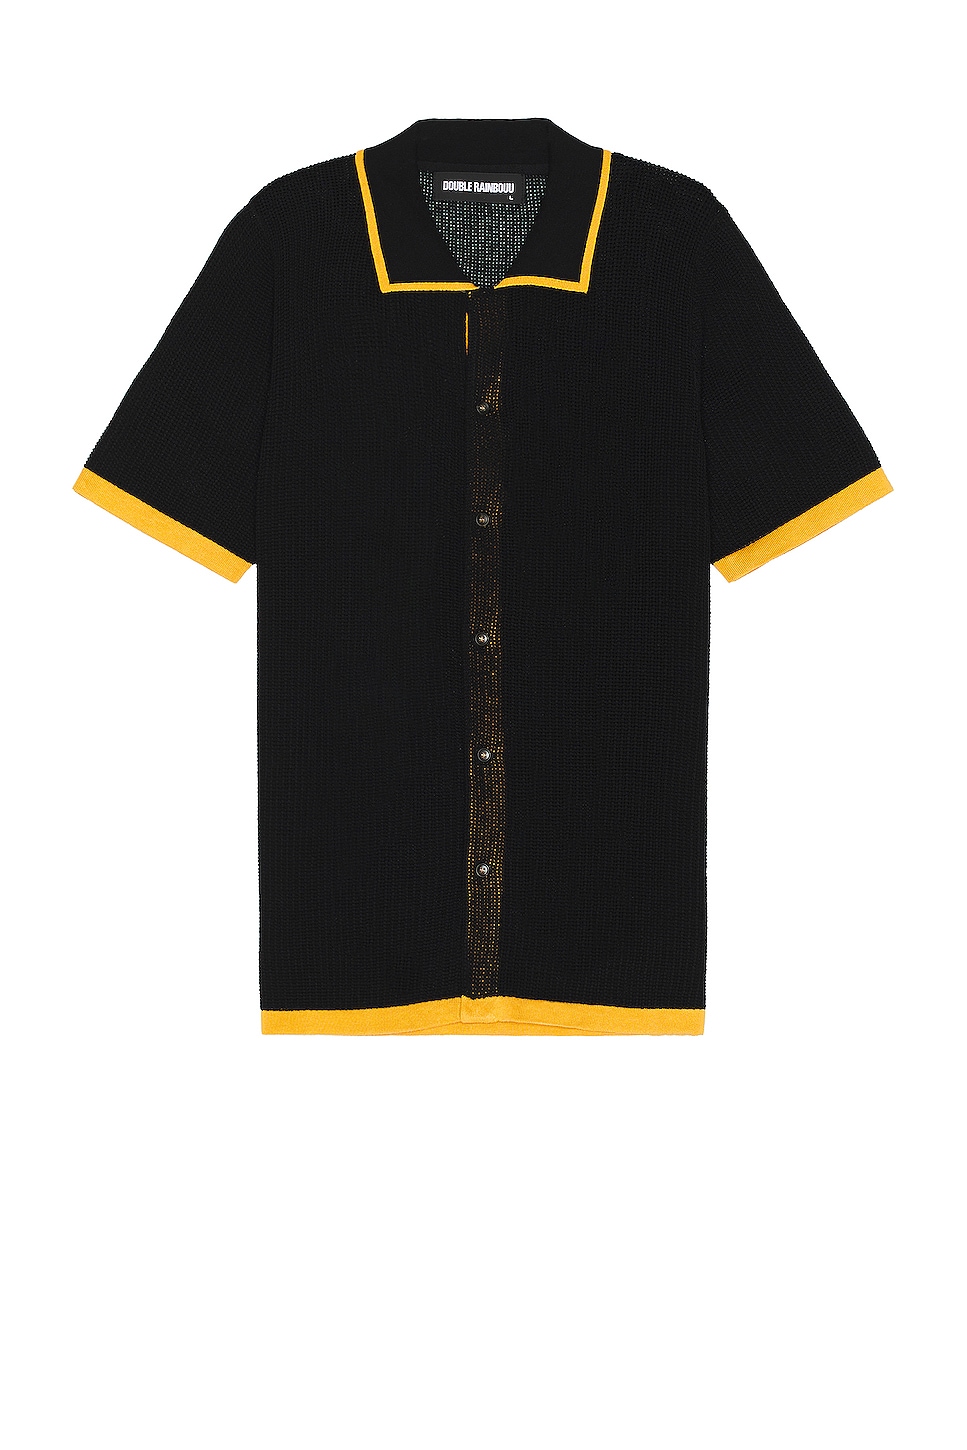 Image 1 of DOUBLE RAINBOUU Knit Shirt in Black & Gold